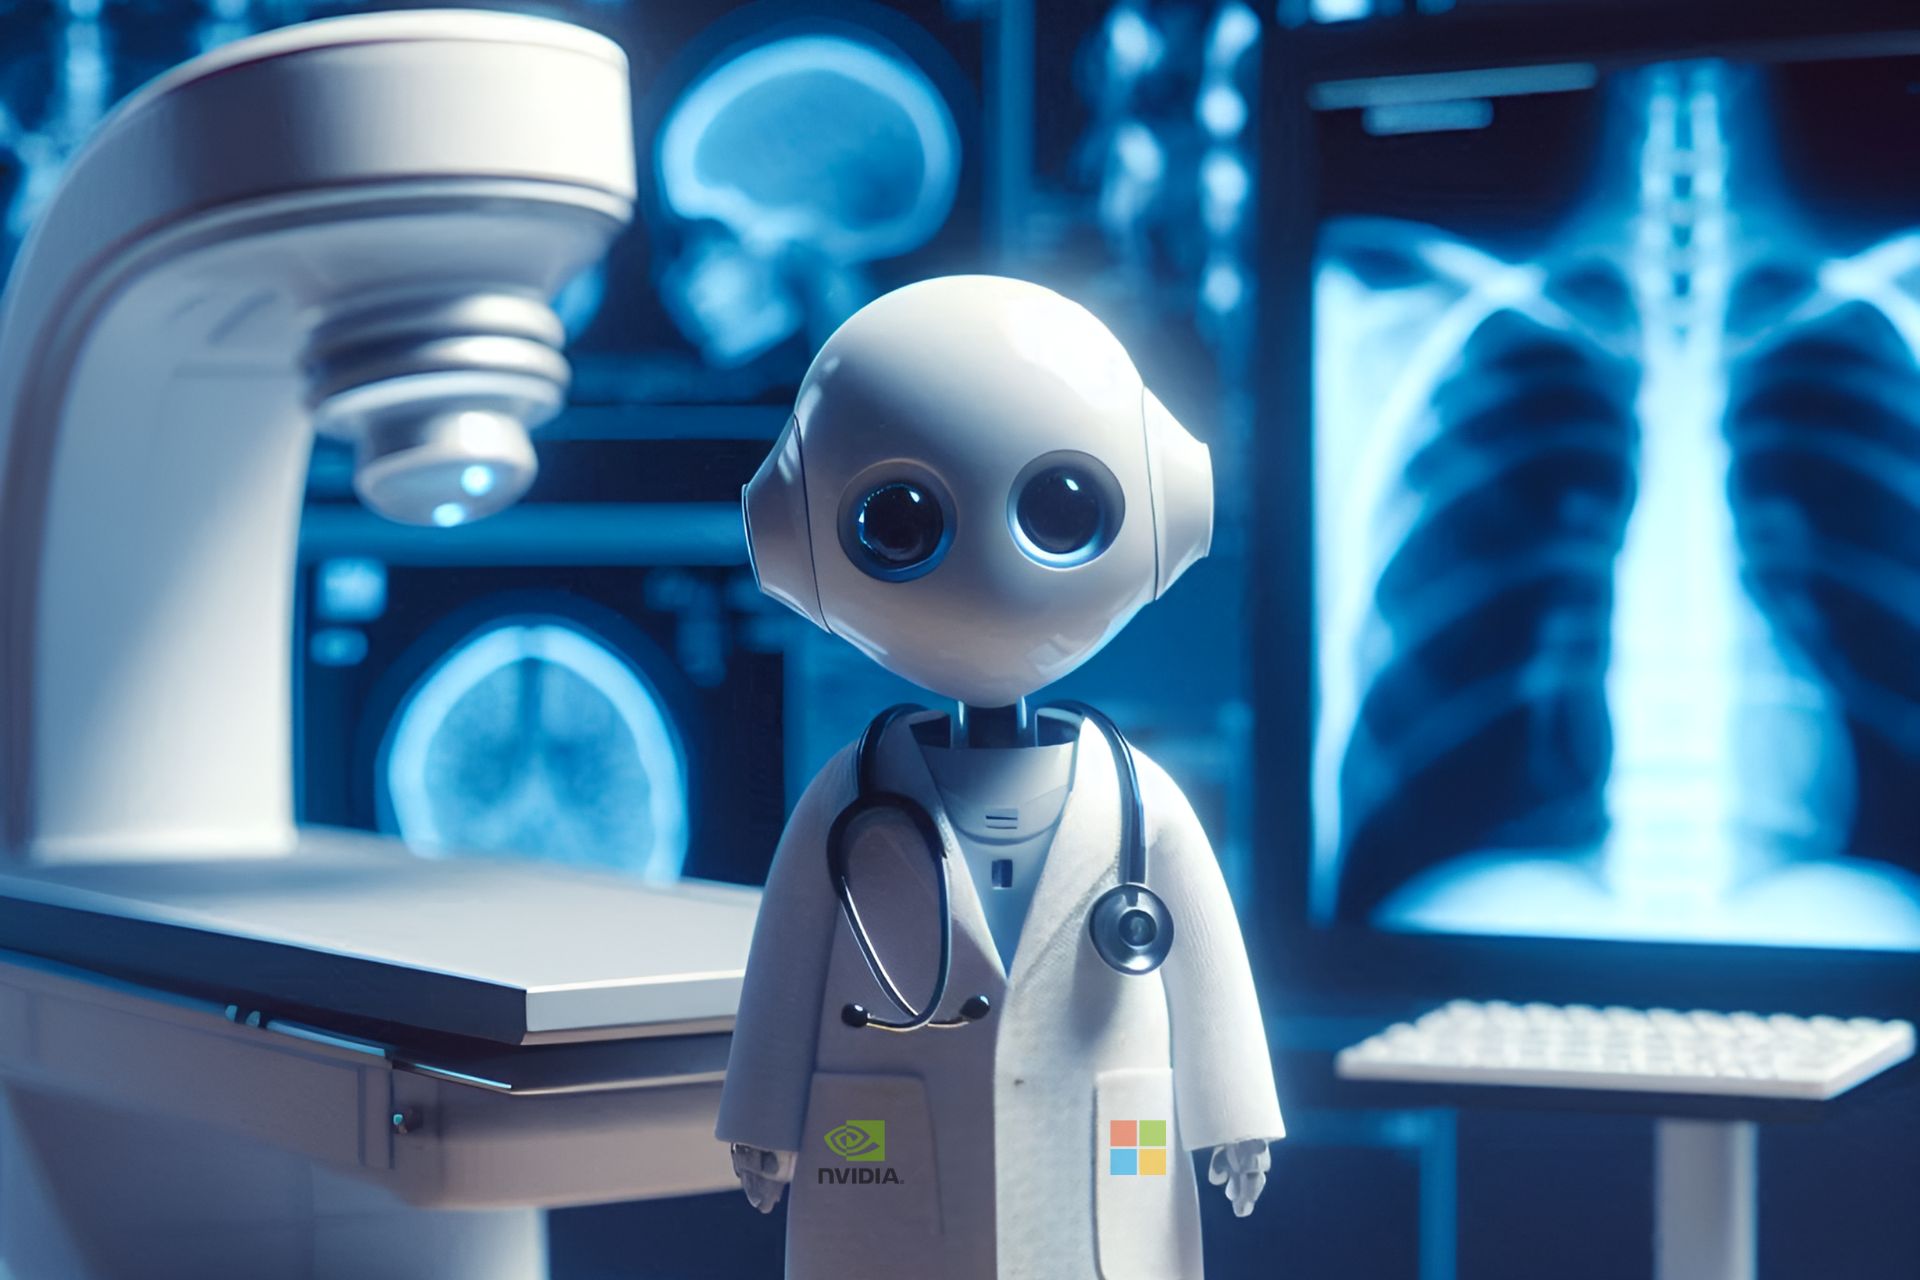 An AI generated image of a healthcare robot made by Nvidia and Microsoft